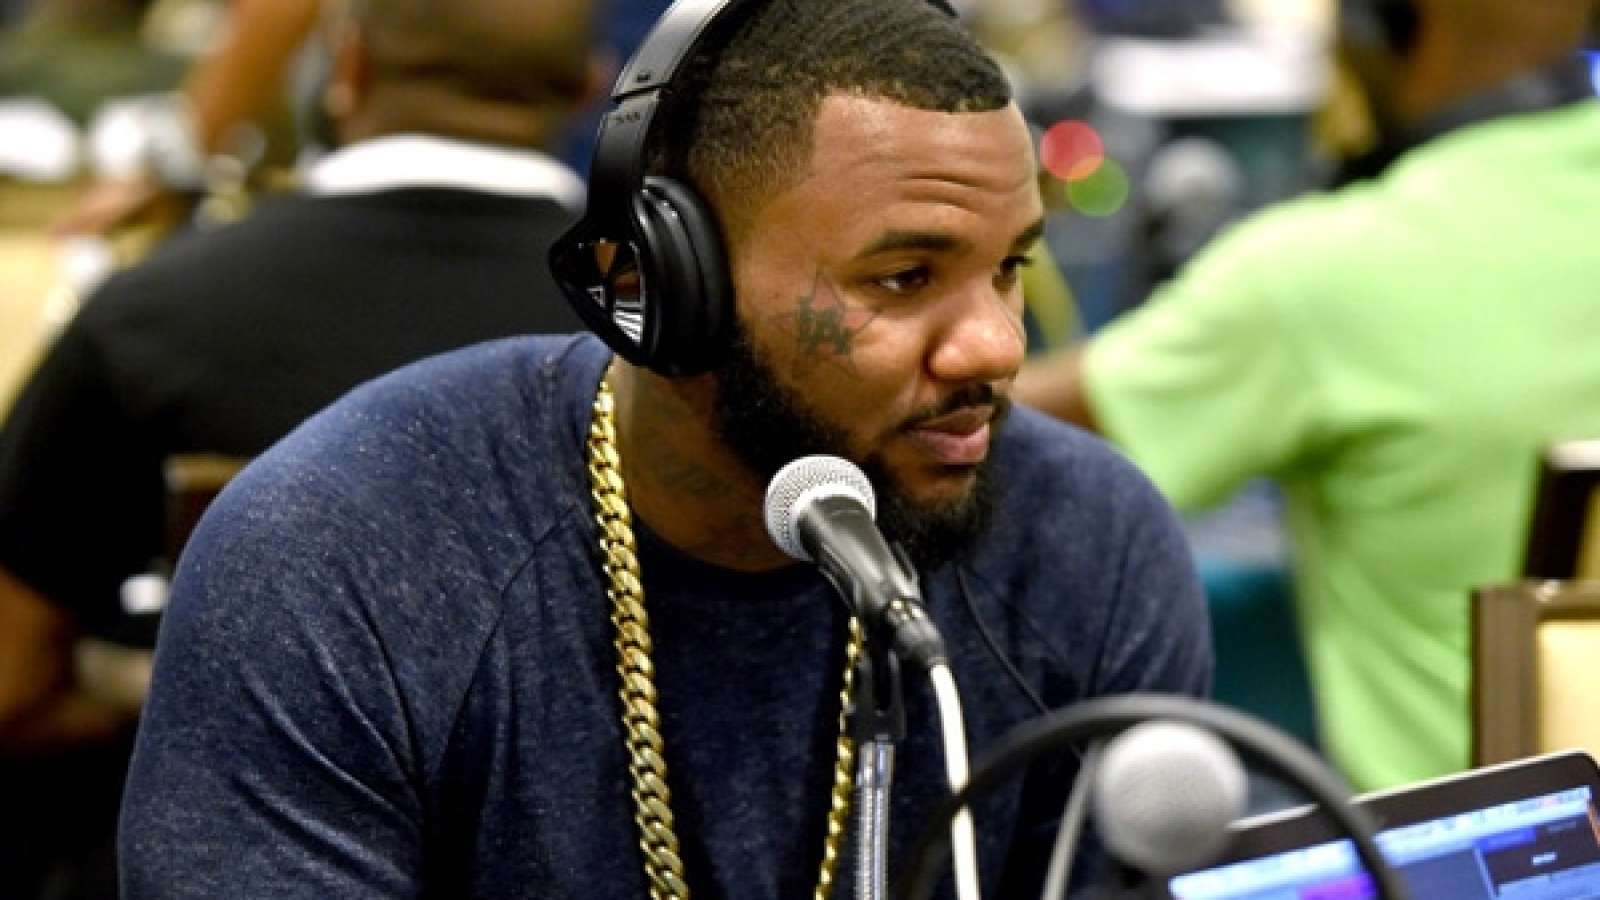 The Game: Rapper gifts woman with $1000 worth of groceries